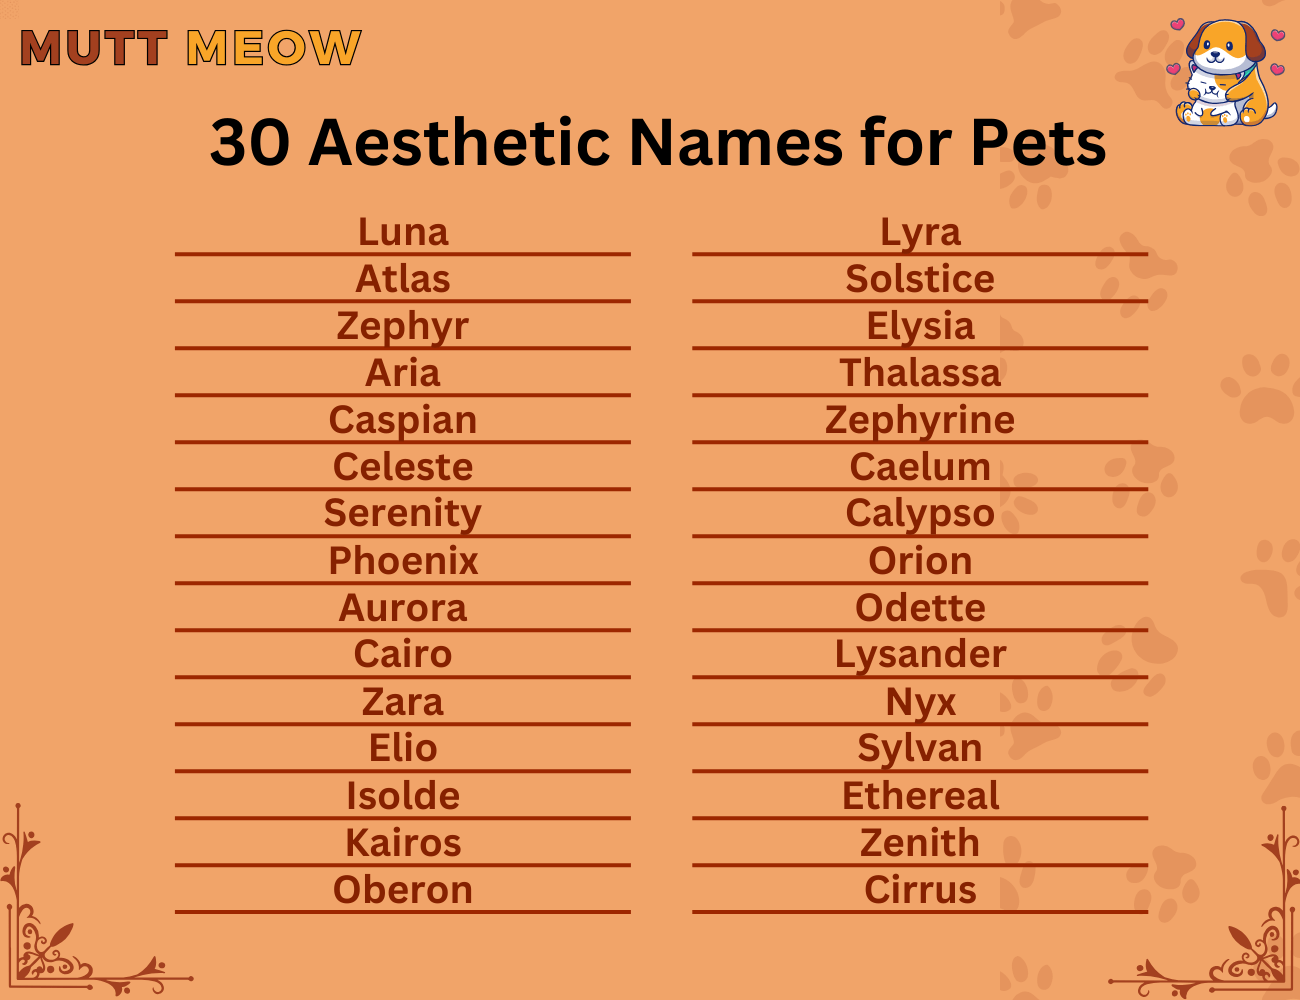 30 Aesthetic Names for Pets